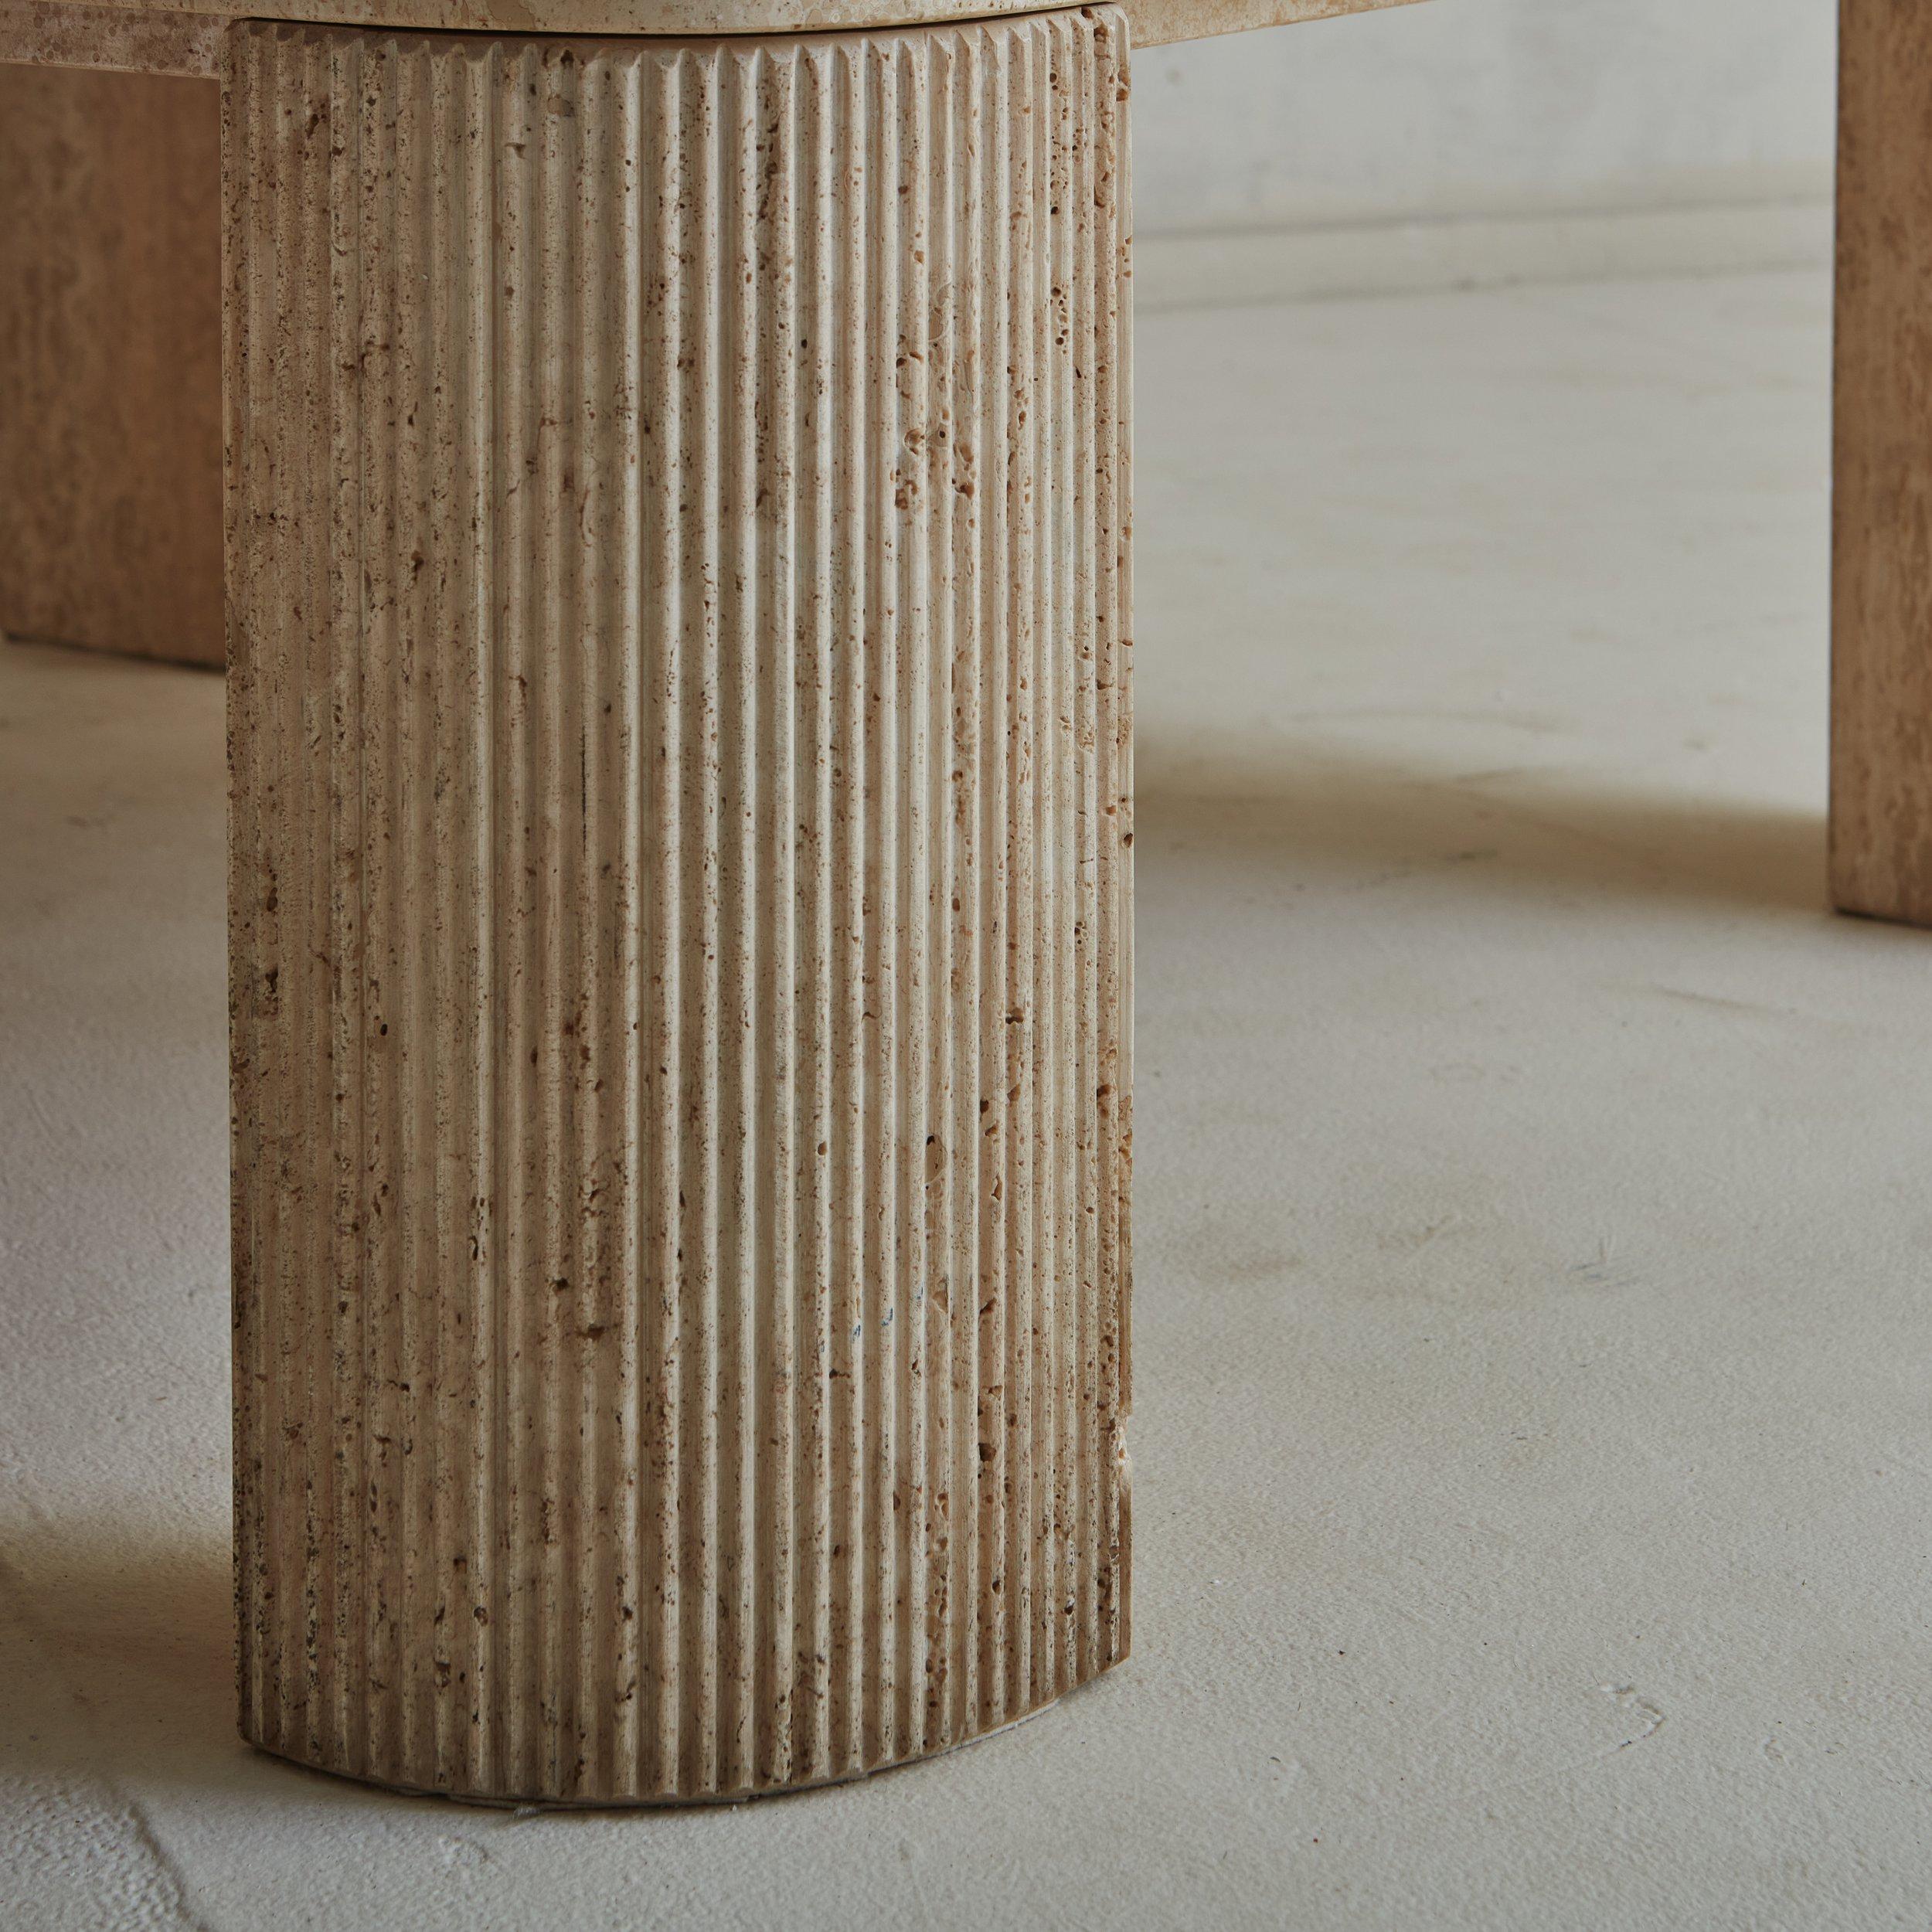 Square Travertine Coffee Table with Fluted Legs, Italy 20th Century For Sale 4